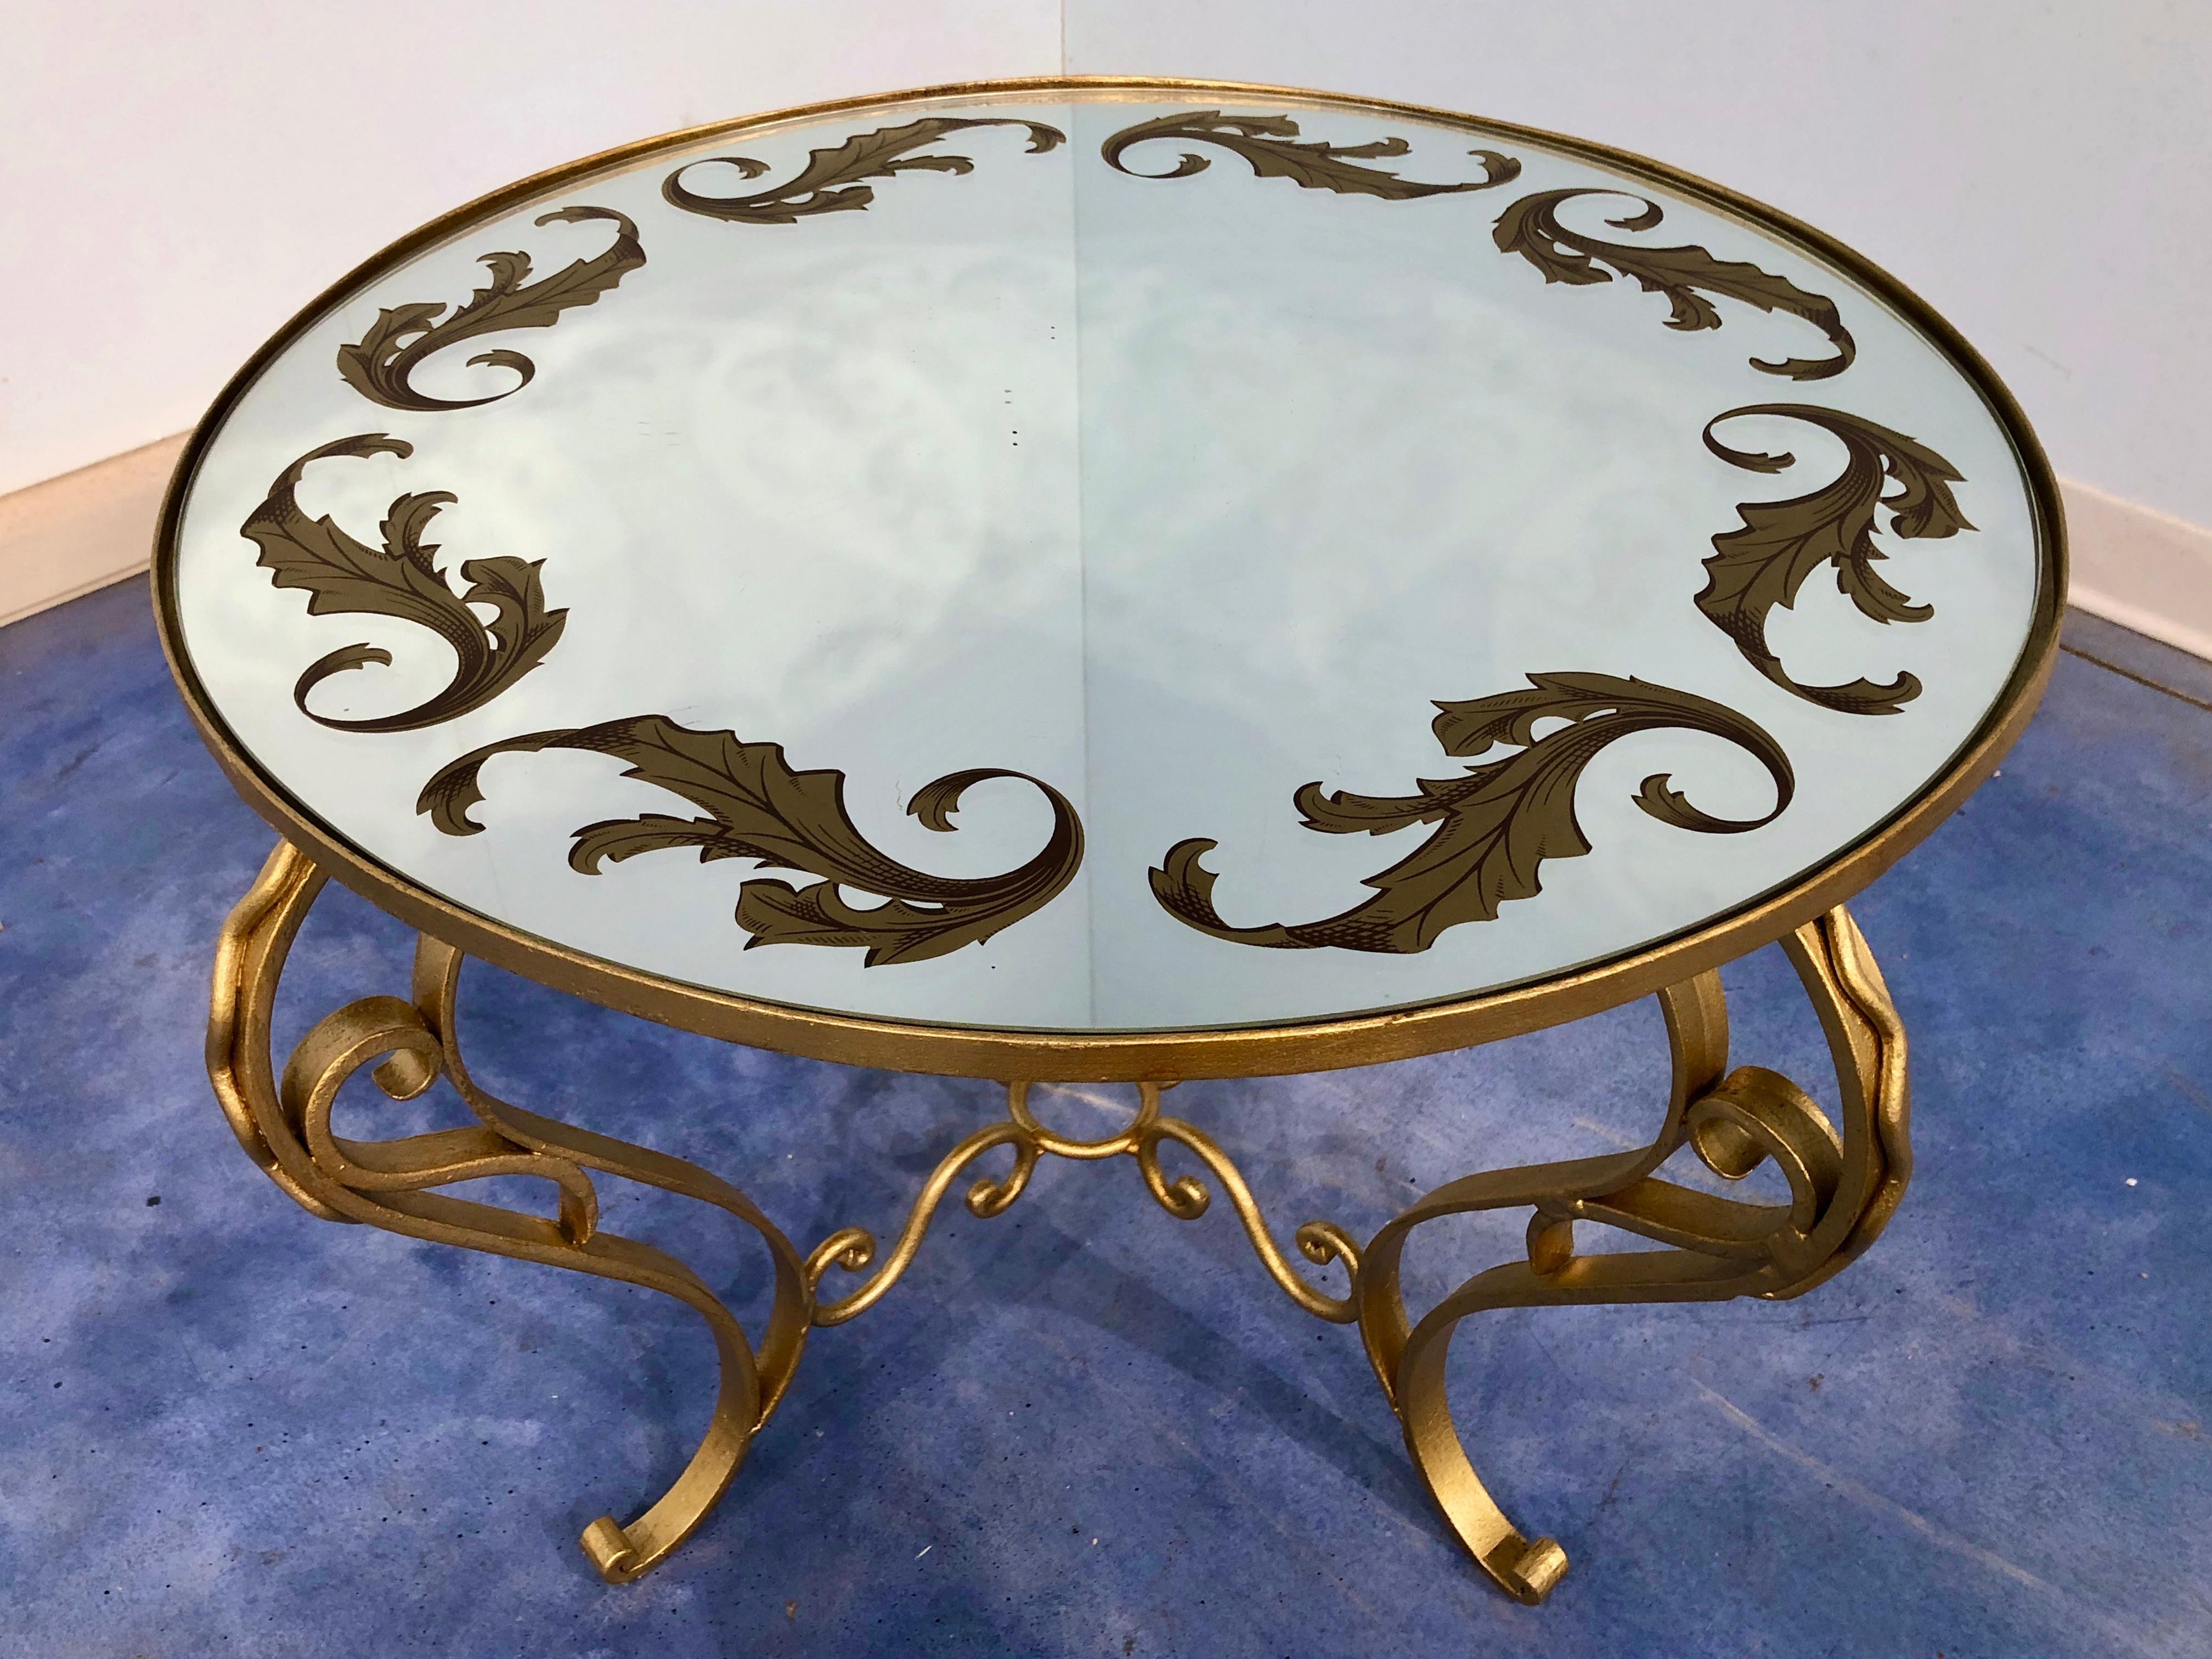 French Art Deco Round Coffee Table in Gilded Iron, 1950 In Good Condition For Sale In Traversetolo, IT